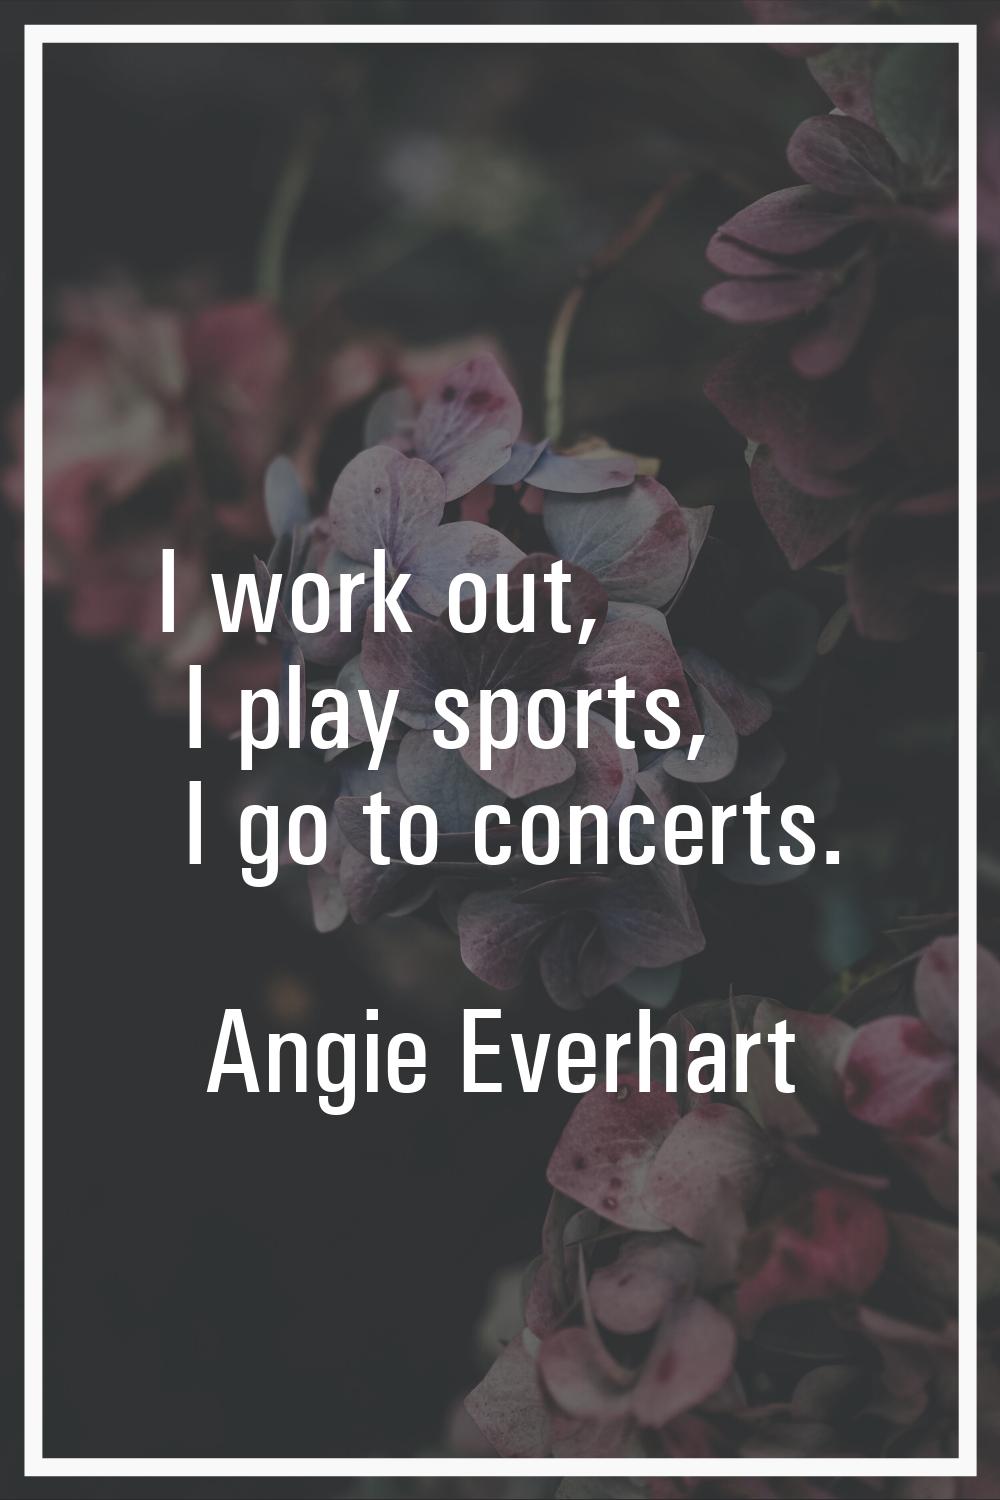 I work out, I play sports, I go to concerts.